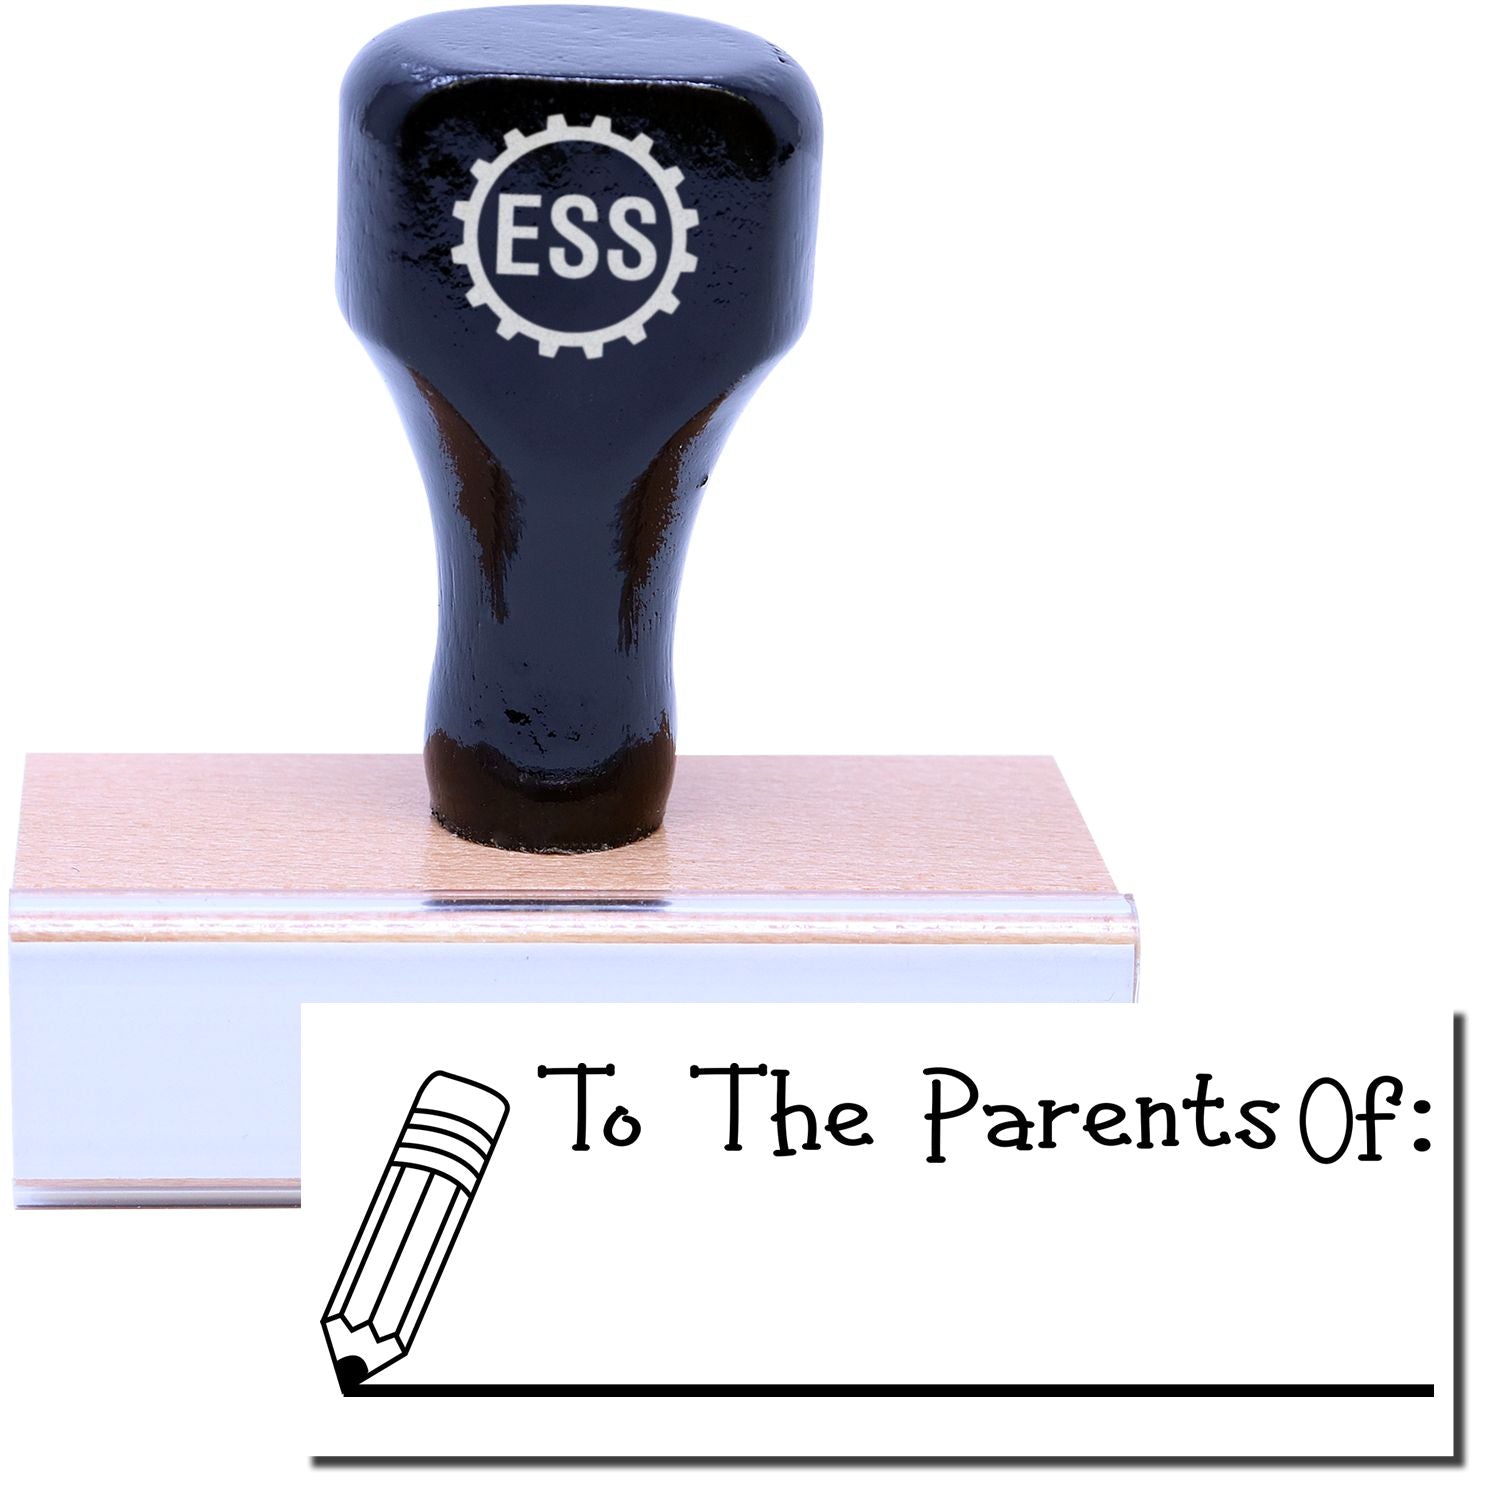 A stock office rubber stamp with a stamped image showing how the text "To The Parents Of:" in a large font with an image of a pencil next to the line is displayed after stamping.